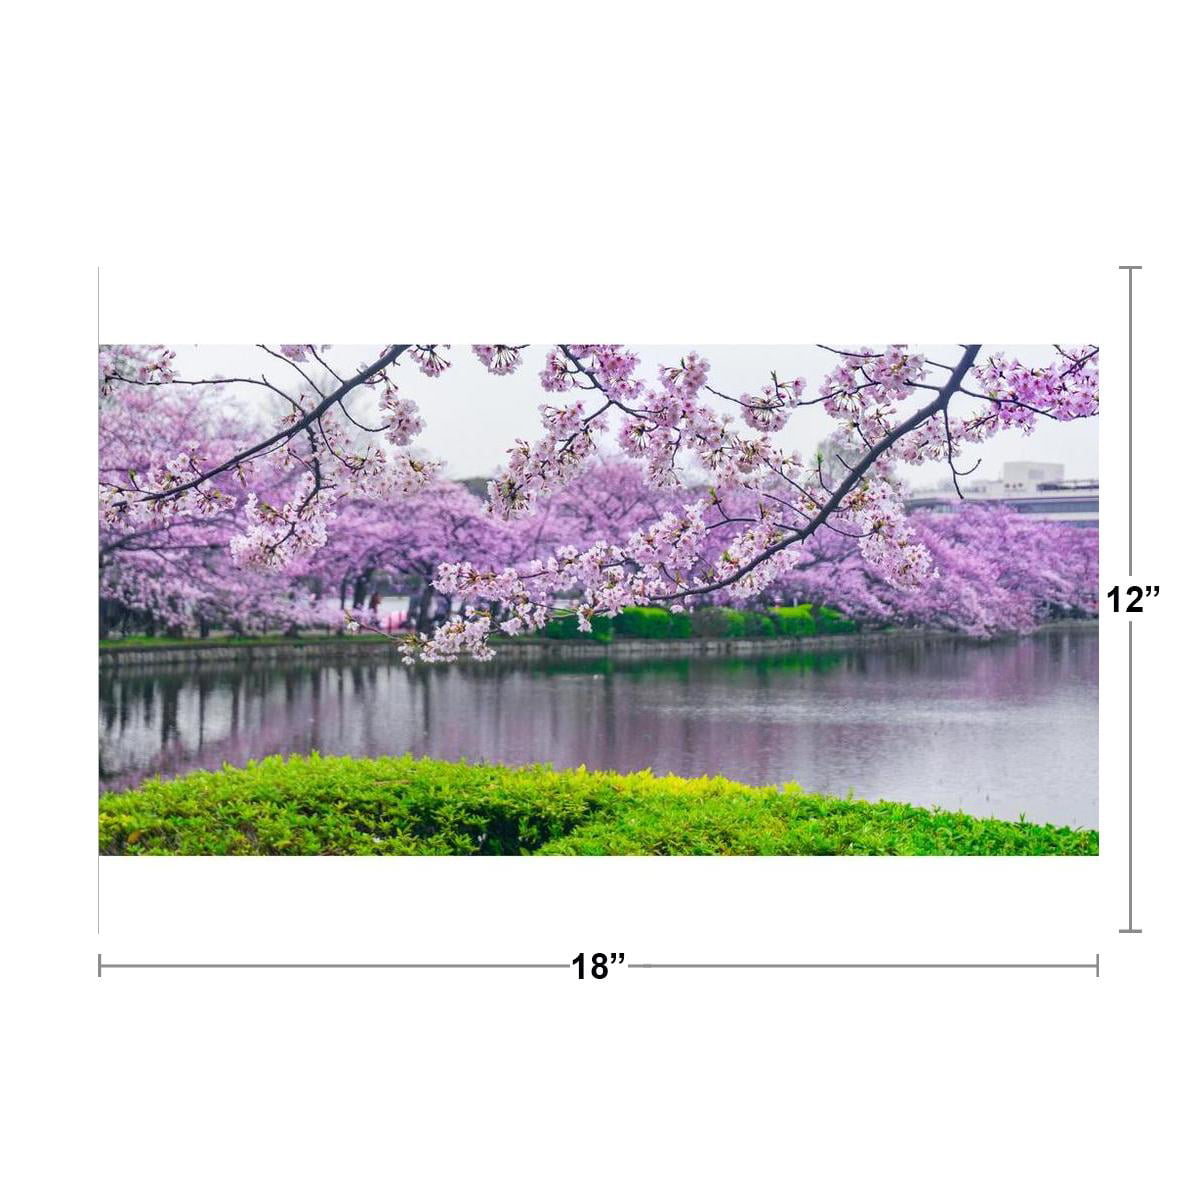 Cherry Blossoms In Bloom Flowering Trees Photo Art Print Poster 18x12 inch 